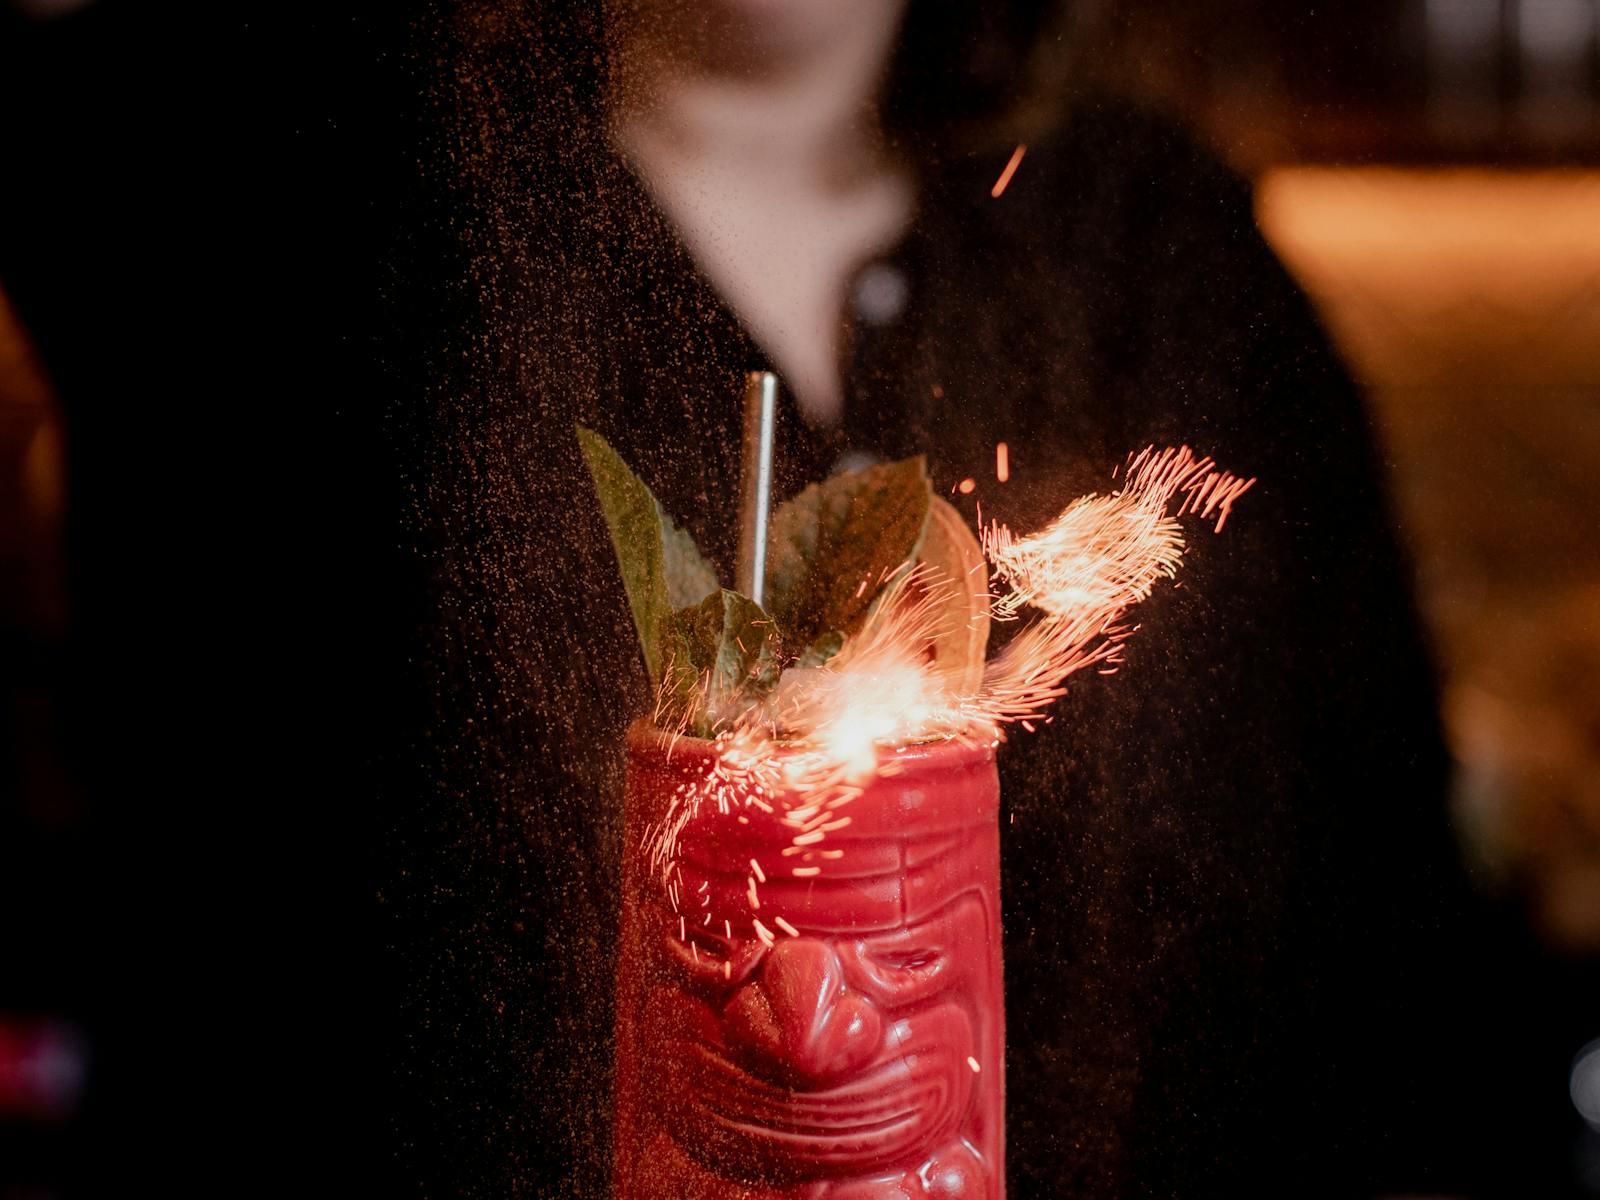 tiki cocktail in a red tiki mug that is on fire